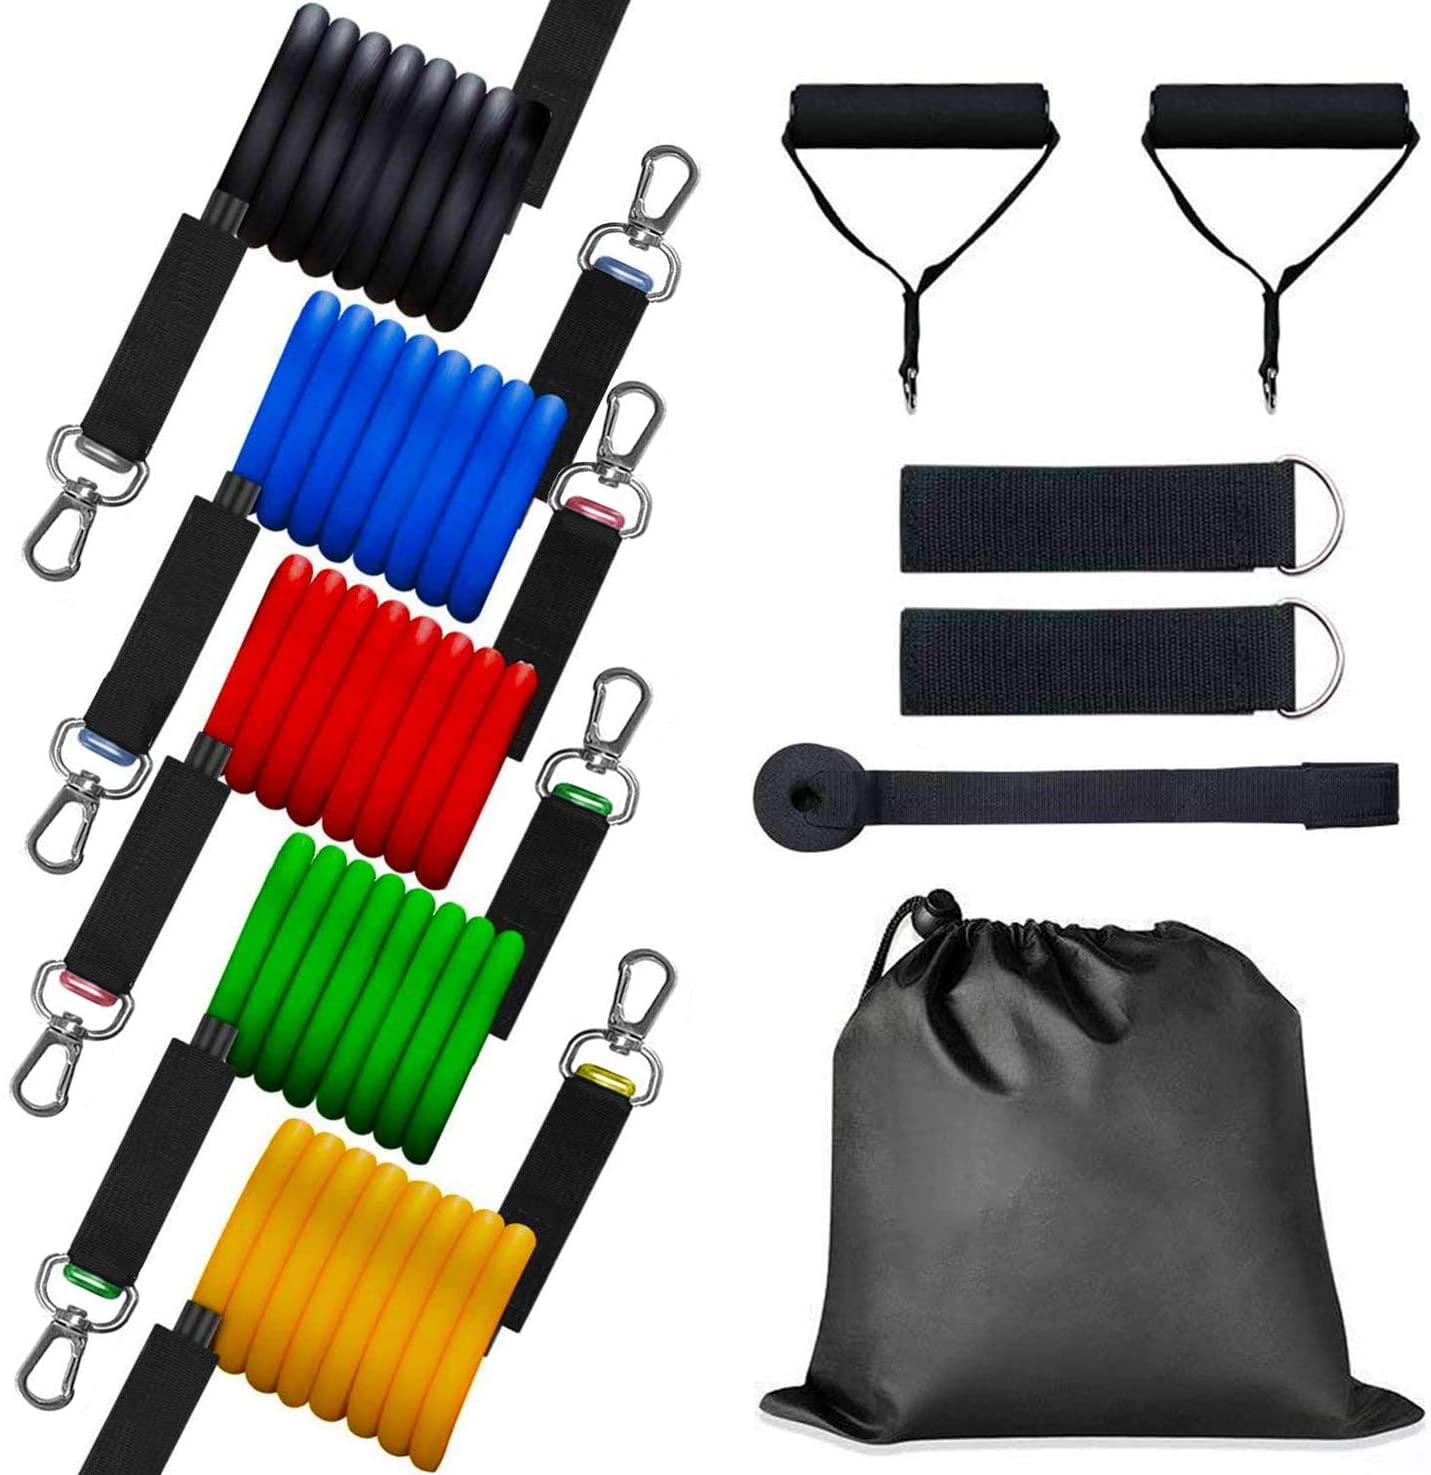 Yoga Home Workouts Exercise Bands with Door Anchor Waterproof Carry Bag Handles Resistance Bands Set Physical Therapy 16 pcs Legs Ankle Straps for Resistance Training 